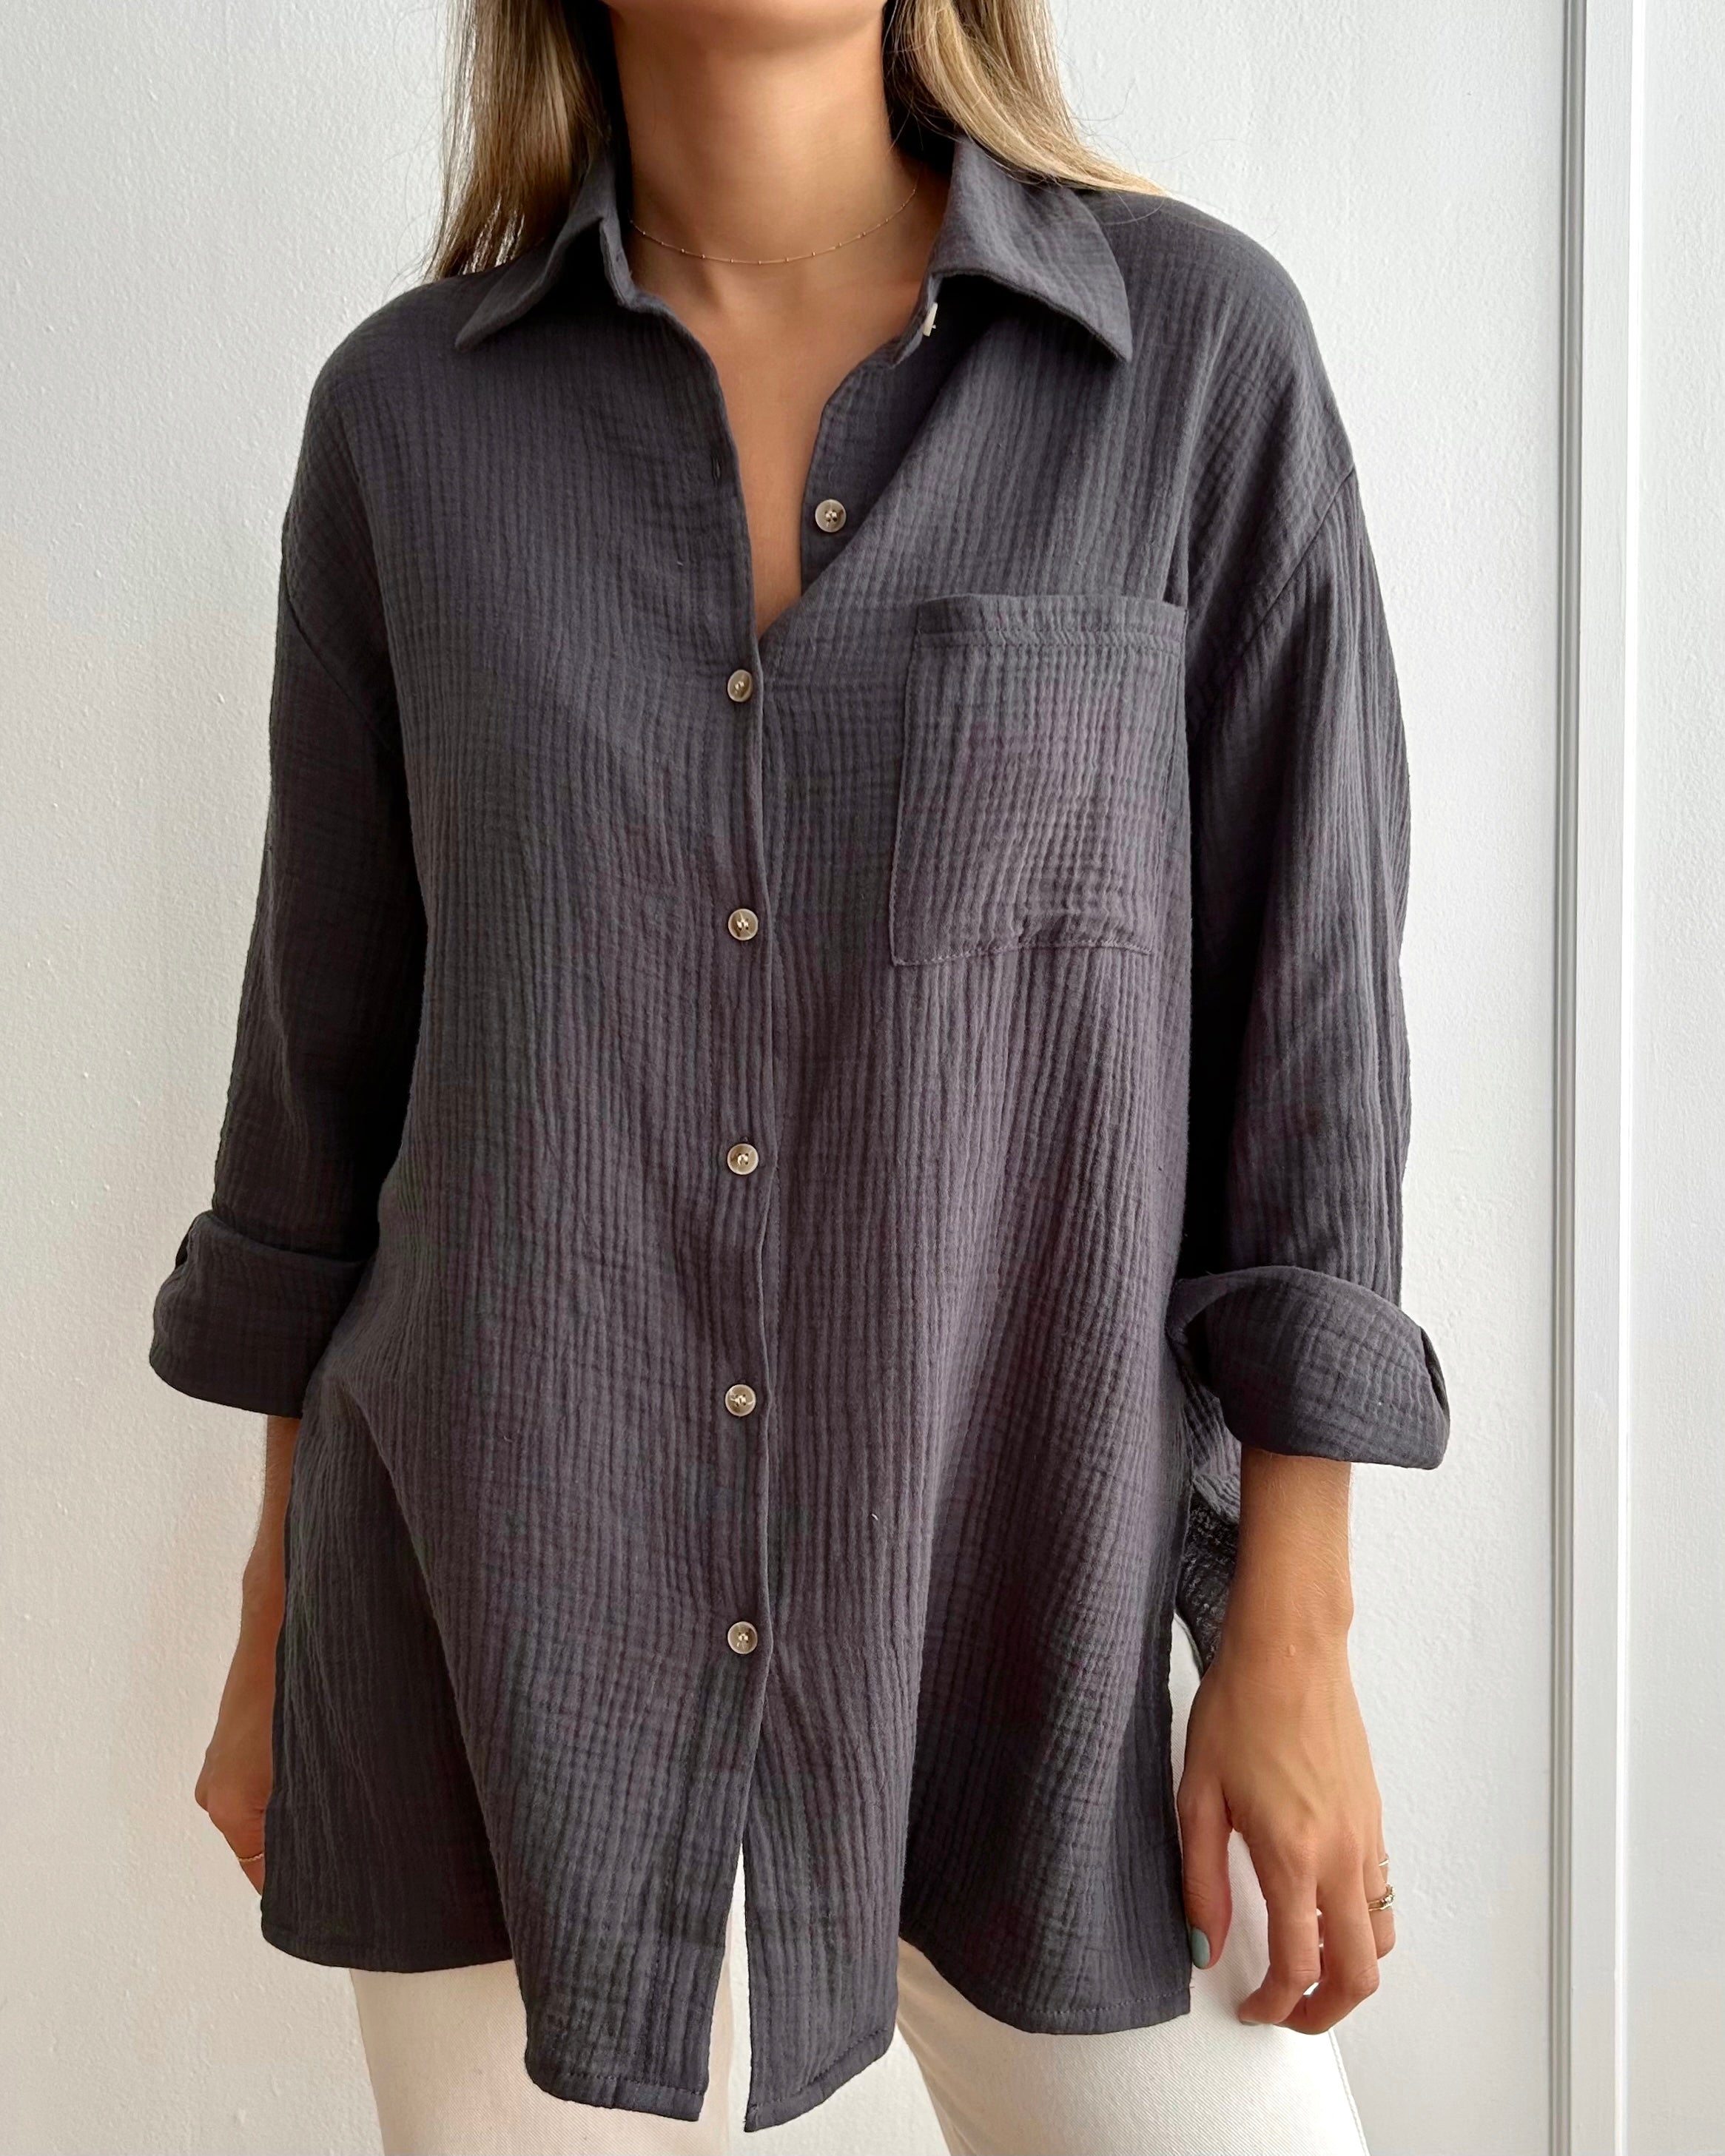 Organic cotton gauze button down. Sustainable and ethically made. Small batch made. 